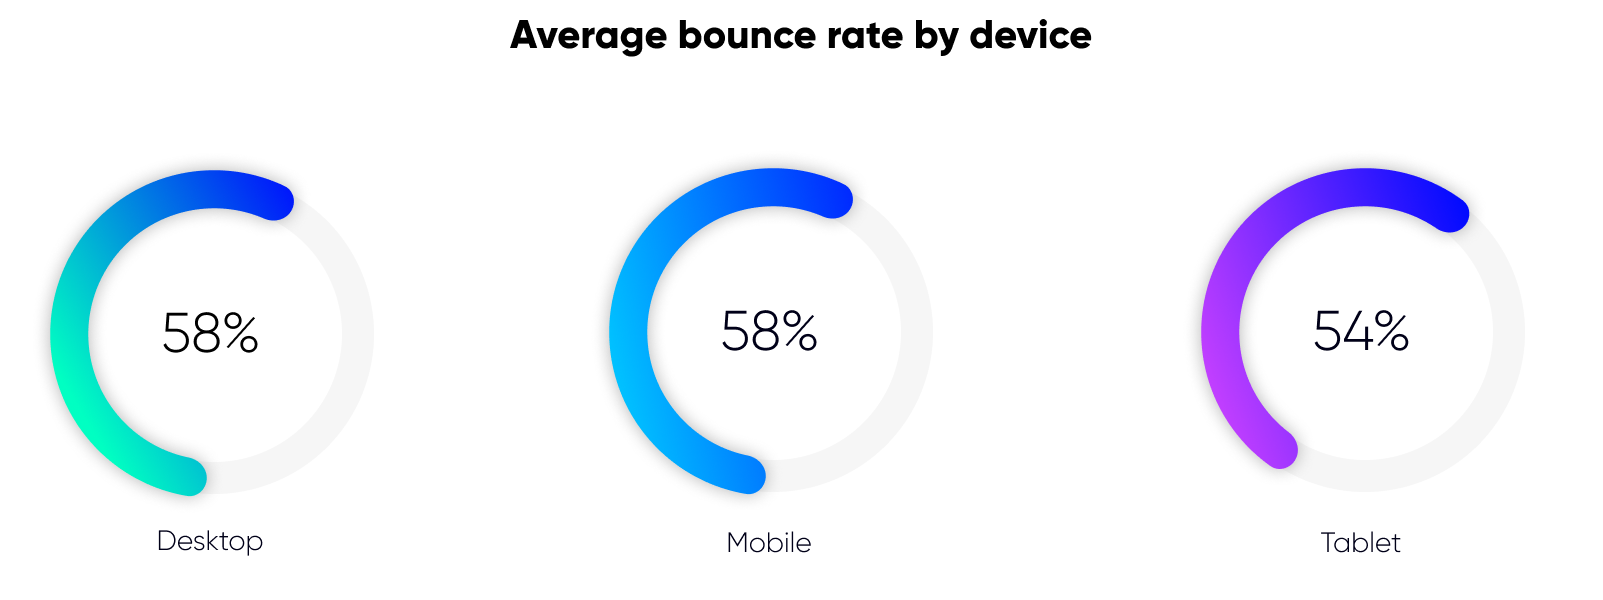 average bounce rate by device in finance service